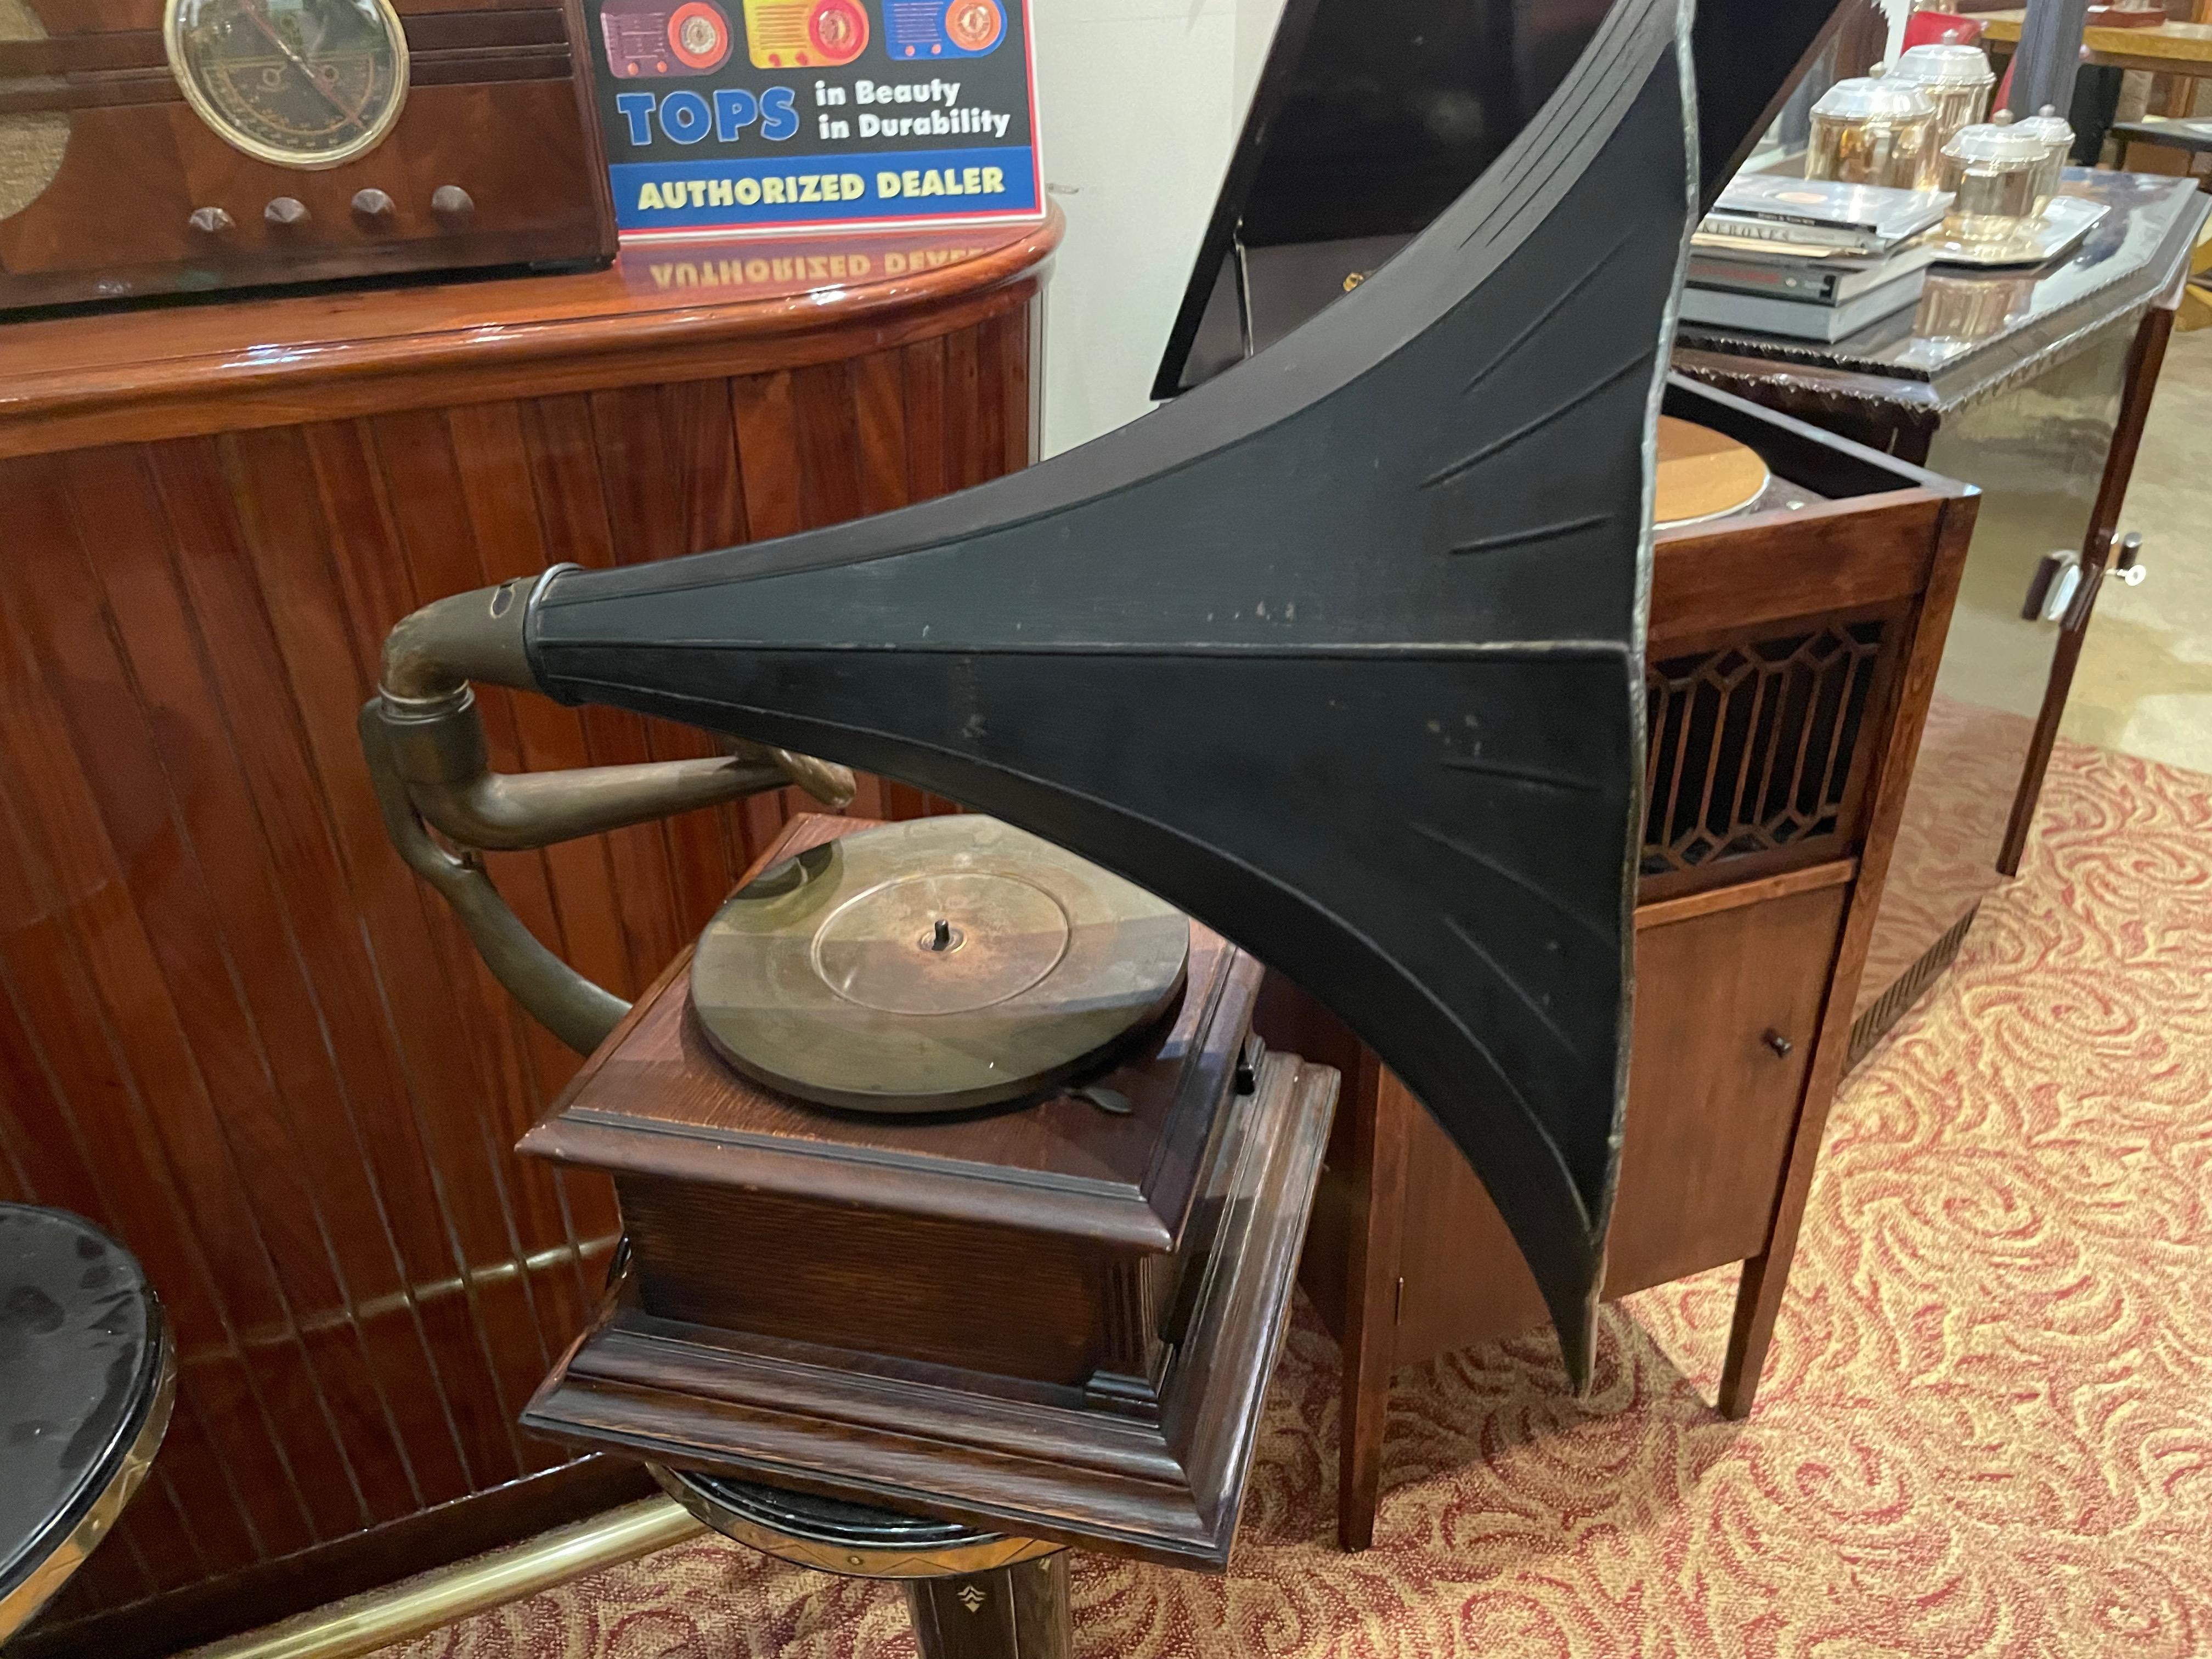 Antique Oak Victor Victor I Victrola Phonograph Talking Machine with Horn. Very good working condition with original crank and nameplate: “His Master’s Voice” made in Camden New Jersey USA. All appropriate brass matching details. Standard talking